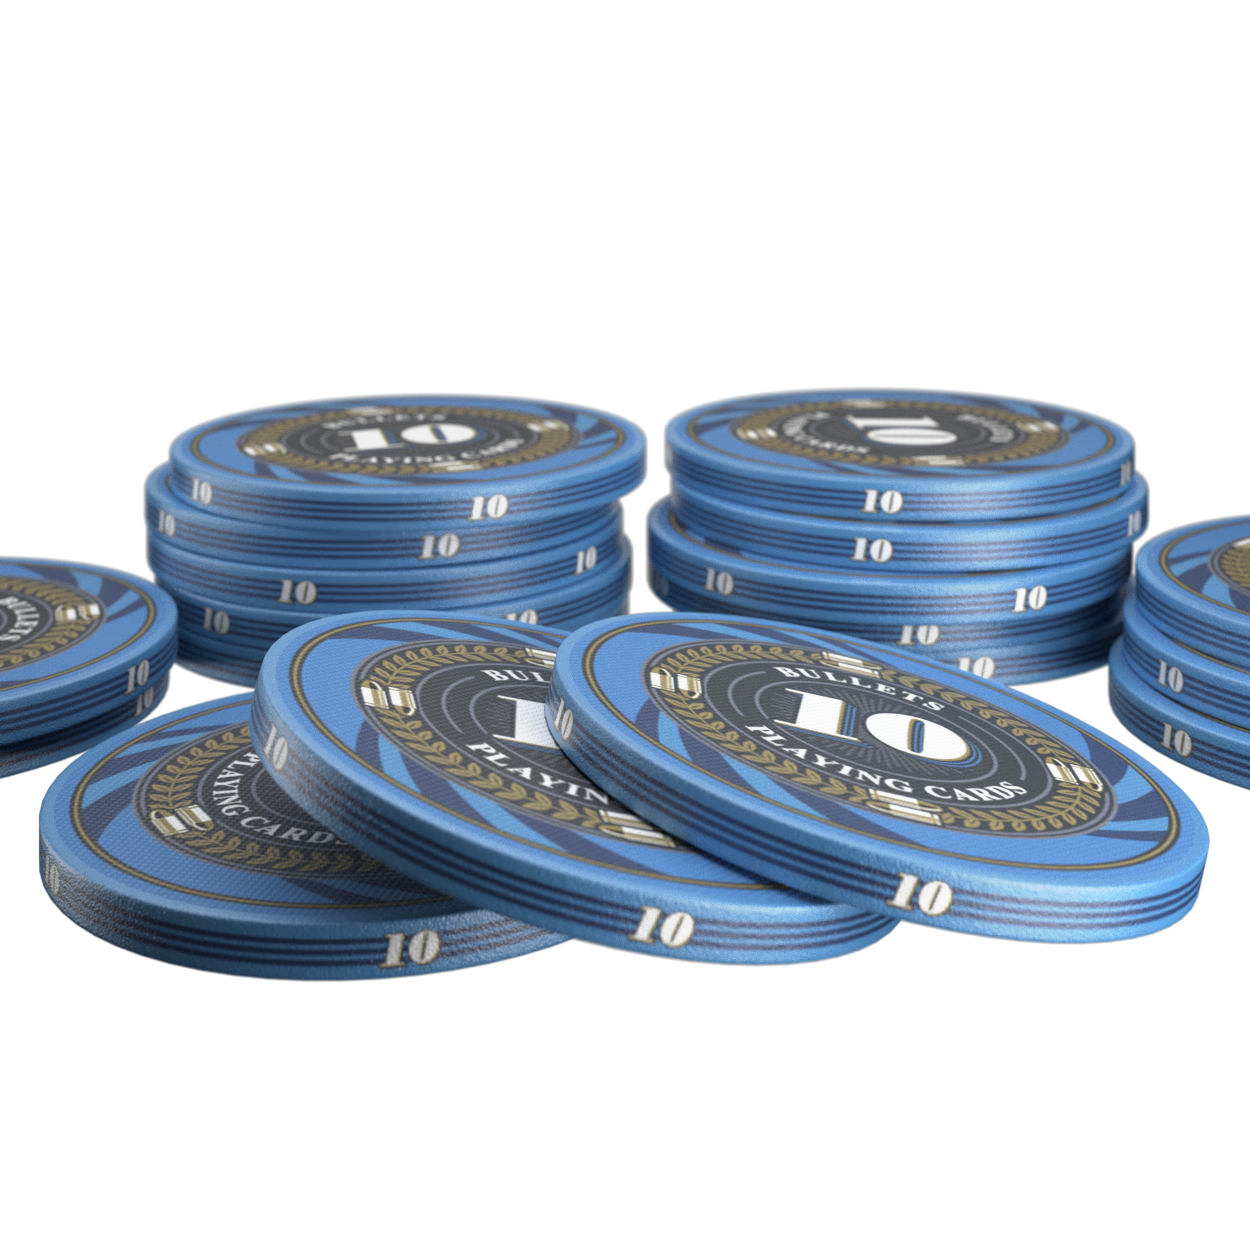 Ceramic poker chips "Silvio" with values ​​- roll of 25